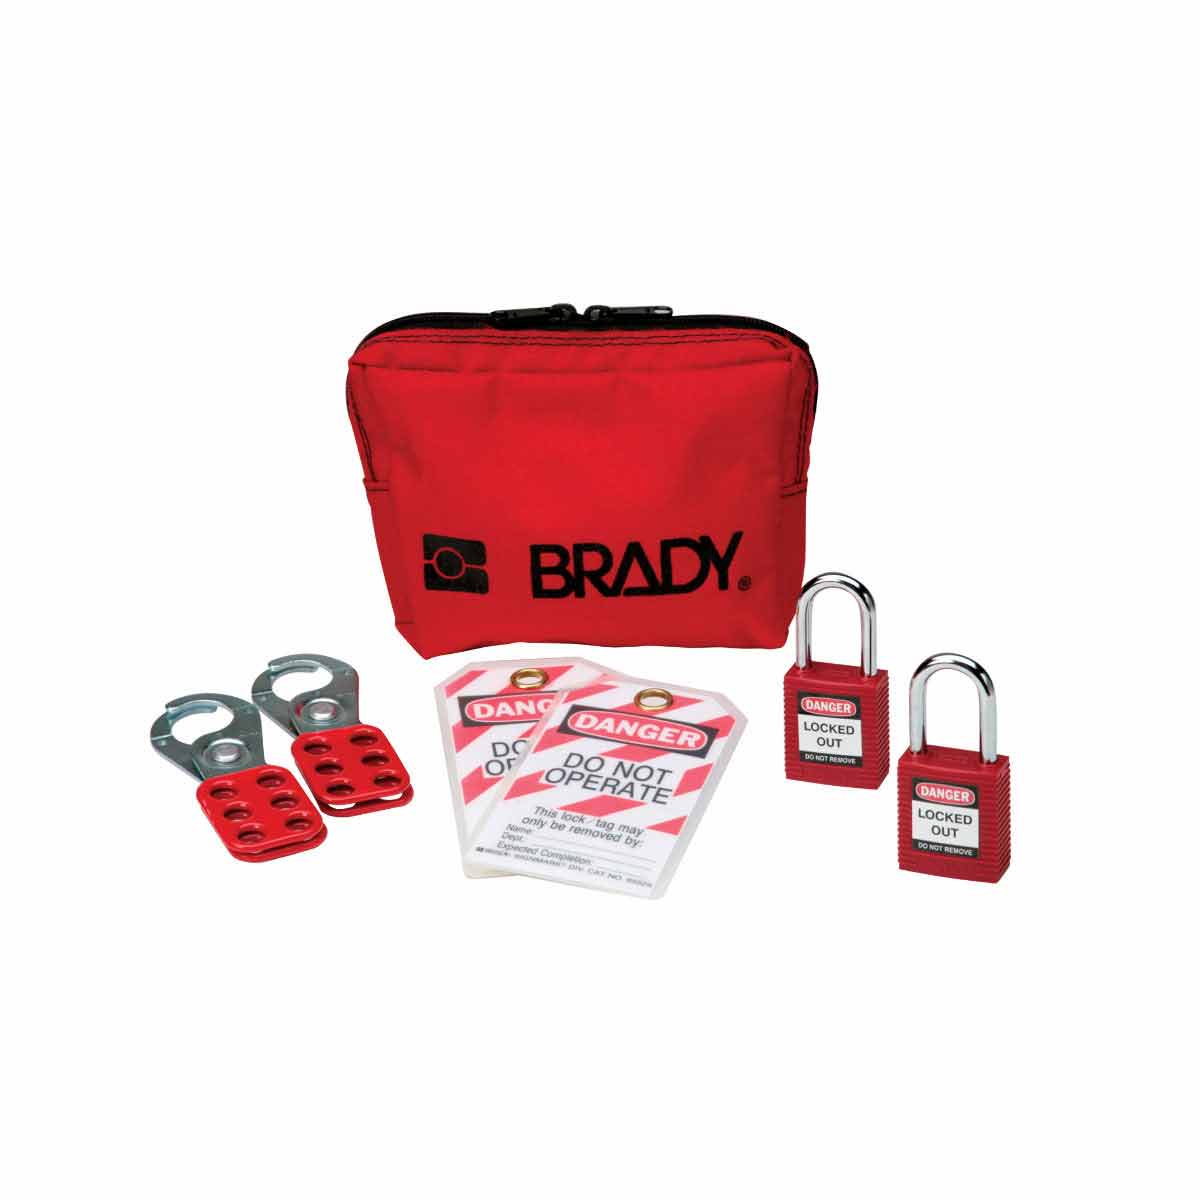 Brady Combination Lockout Satchel Kit Includes 2 Steel Padlocks and 2 Tags 